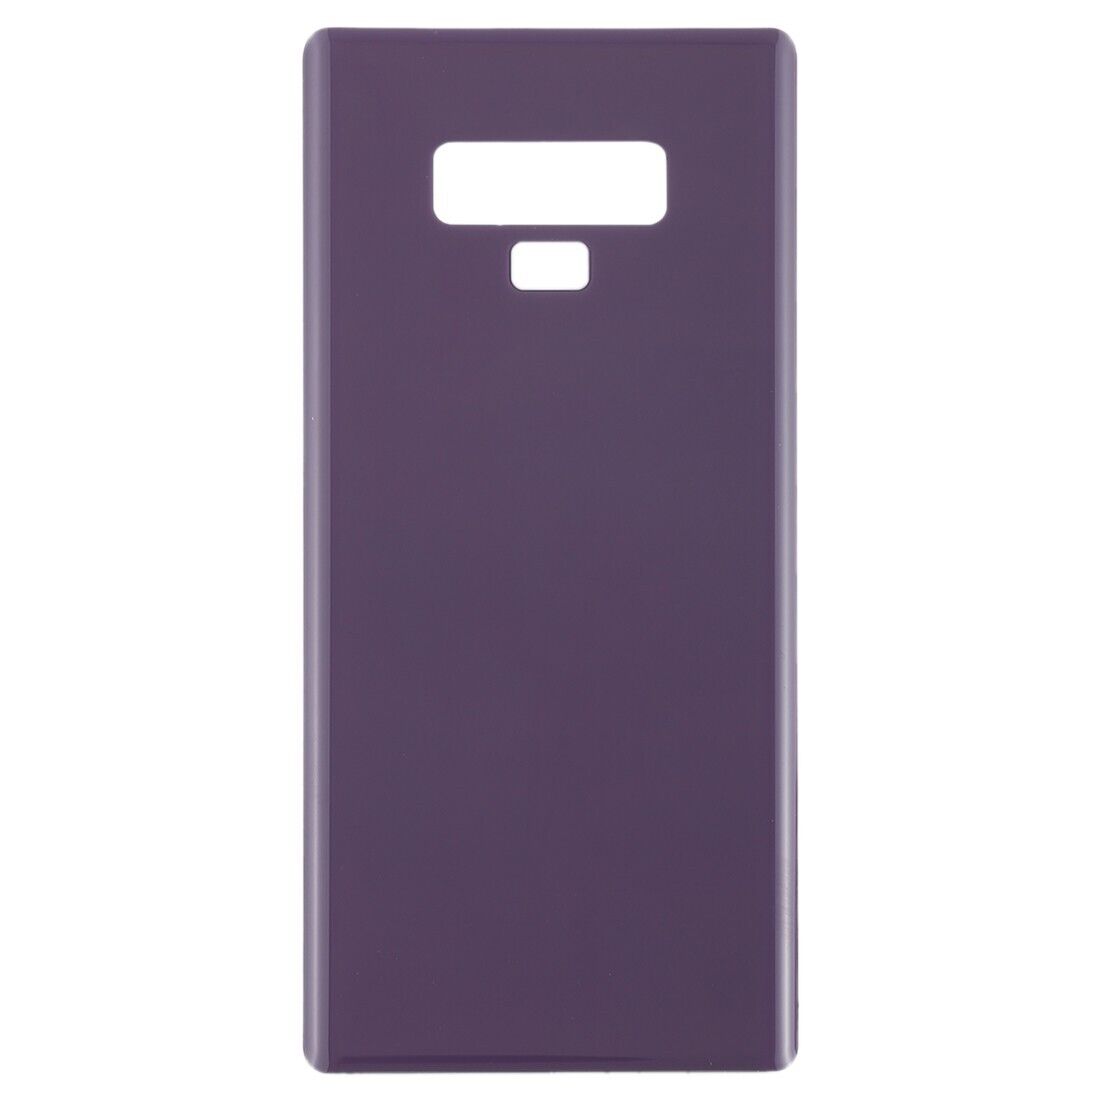 For Galaxy Note9 / N960A / N960F Back Cover (Purple)